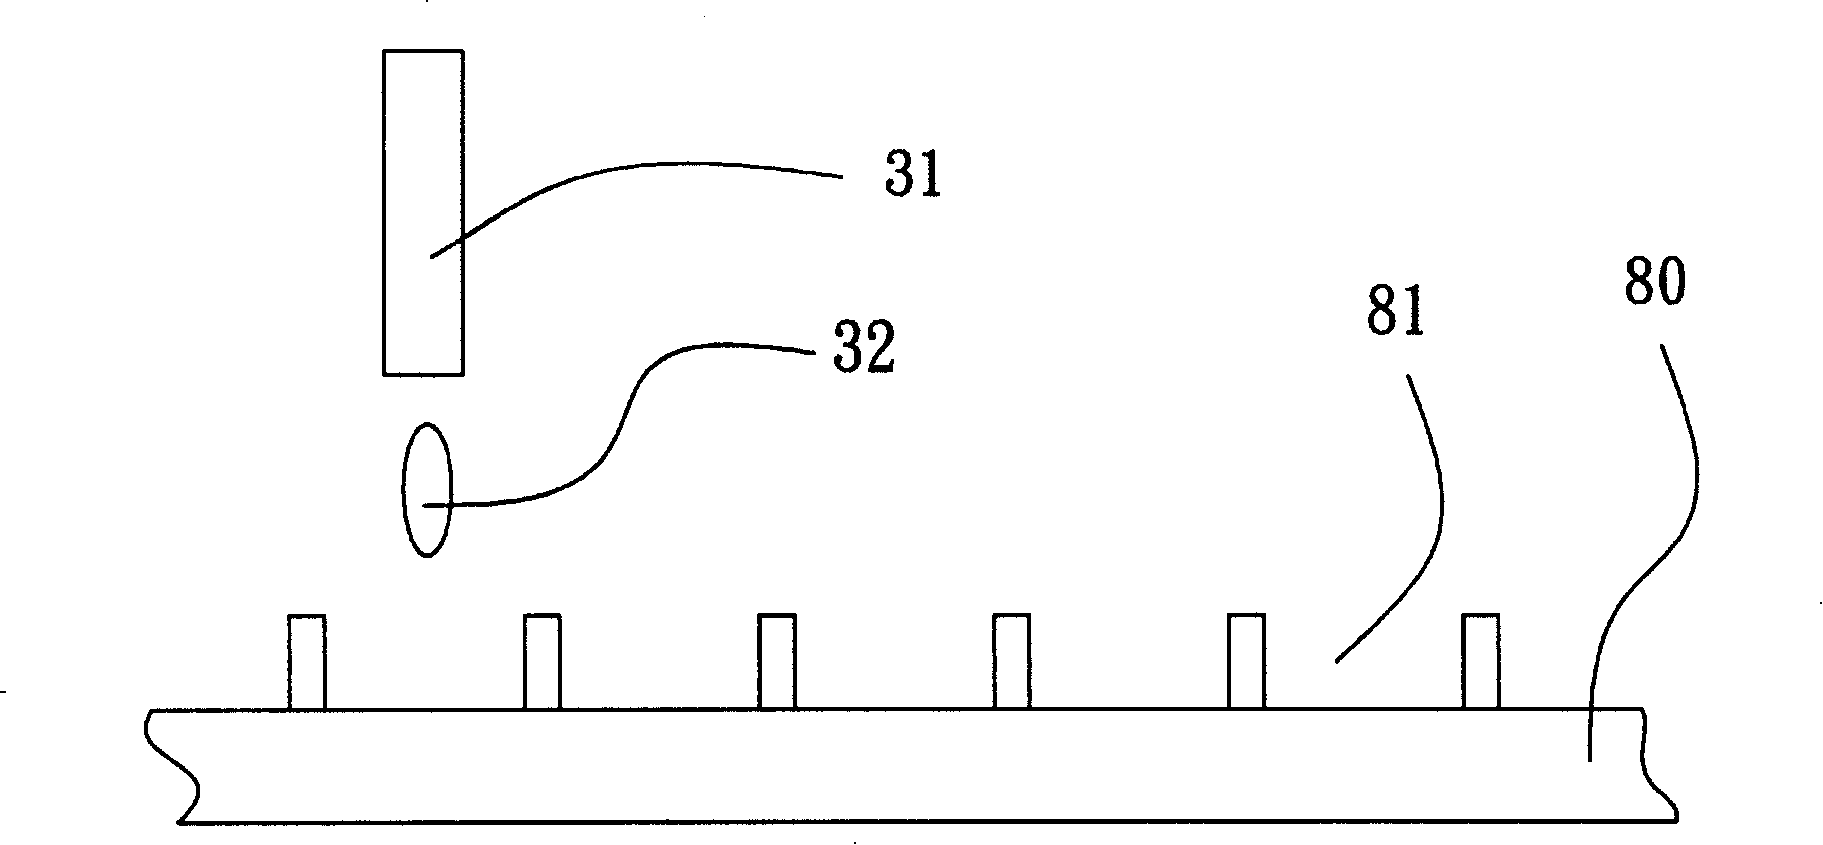 Ink-jet apparatus and method